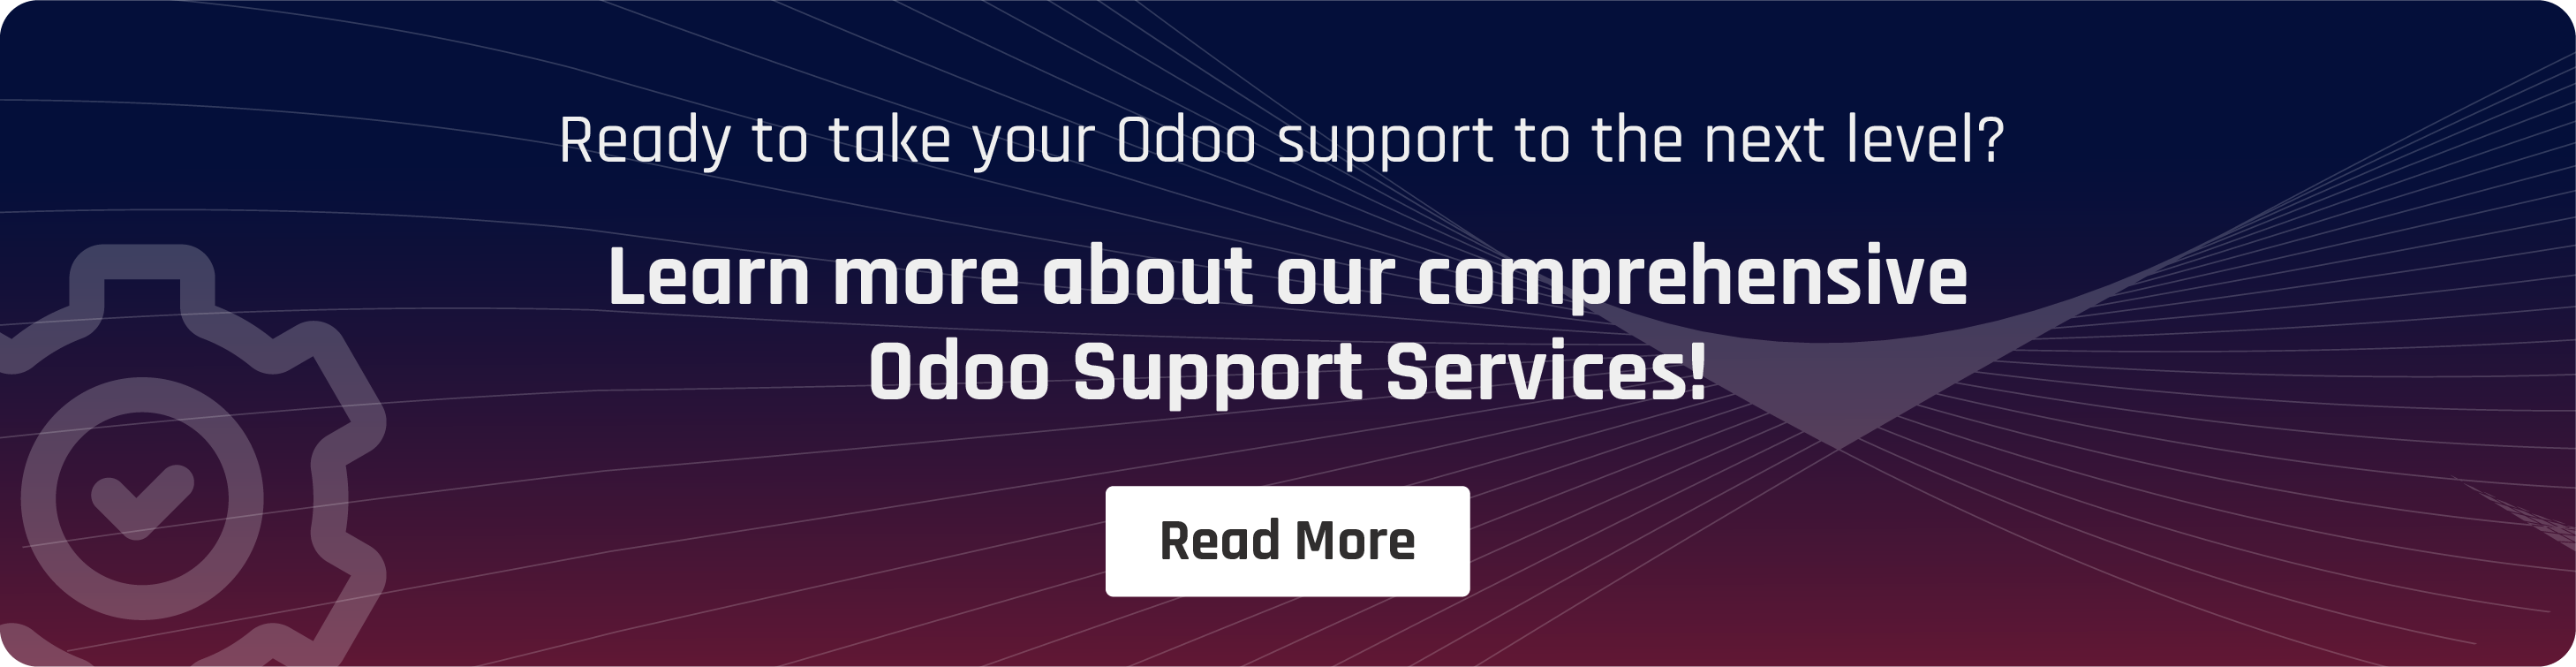 Odoo Support Services from Aktiv